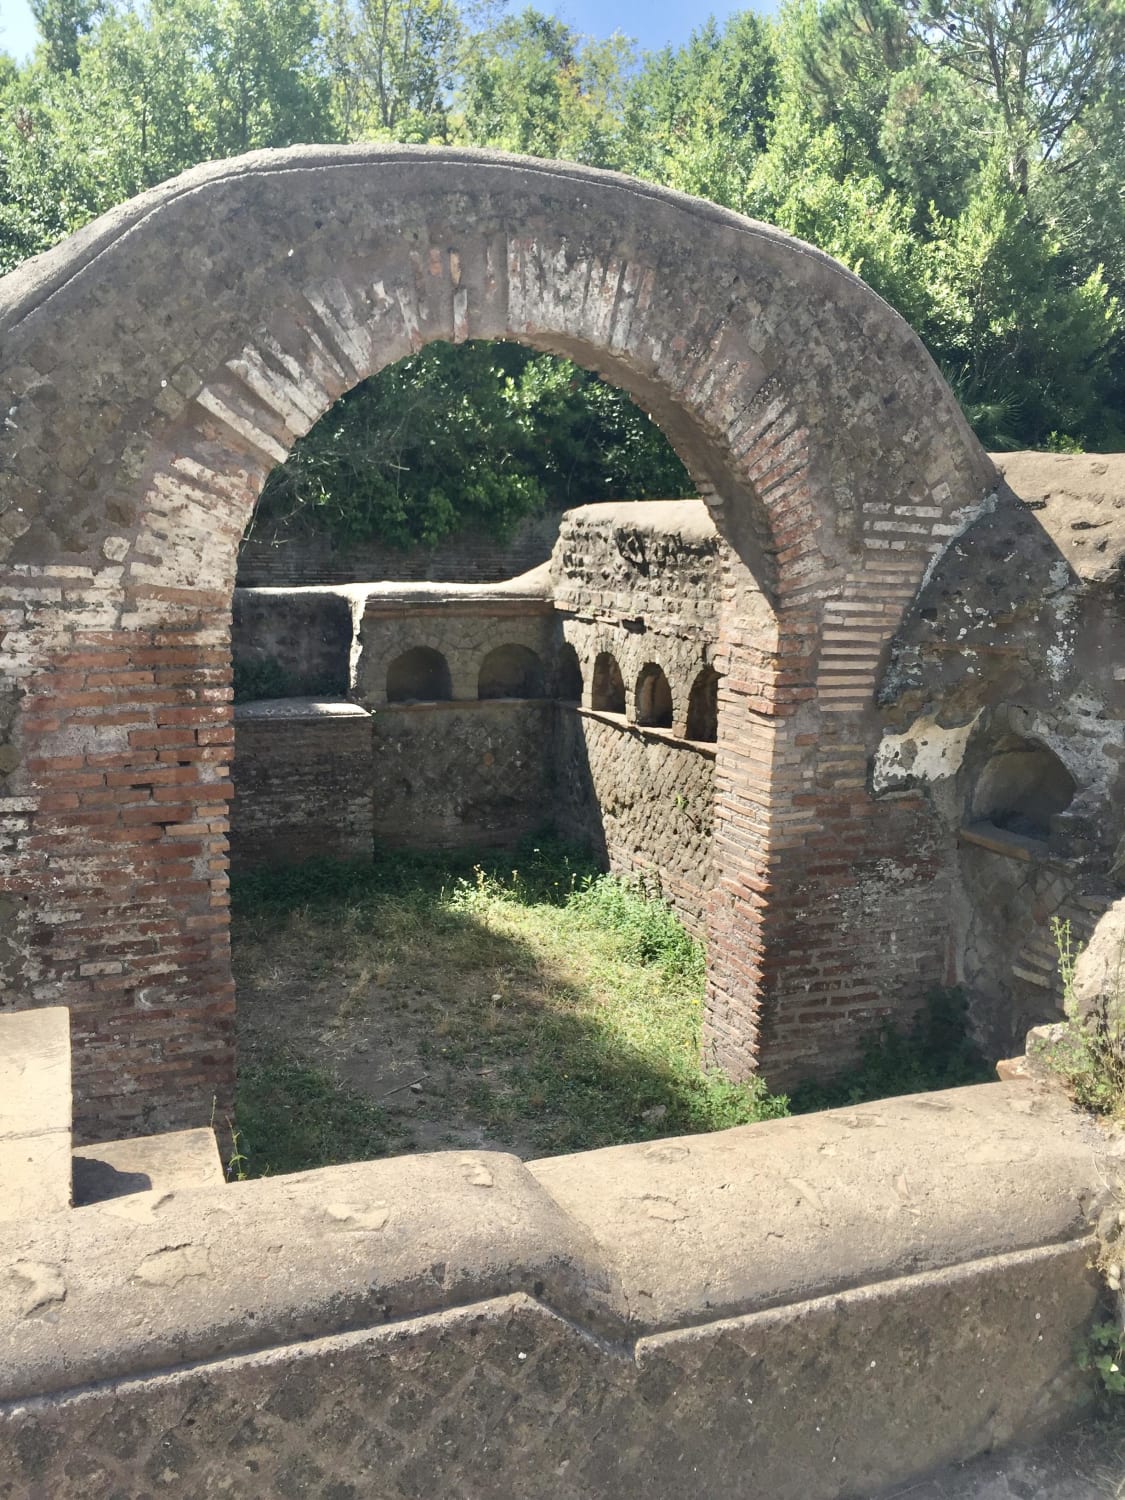 Roman columbarium on the Via Ostiensis, a two-story family tomb with niches for crematory urns. It contains a staircase, leading to a terrace which was used for funerary banquets. The courtyard features an ustrinum, the area where the deceased were burned. c.1st century CE, Ostia, Italy.